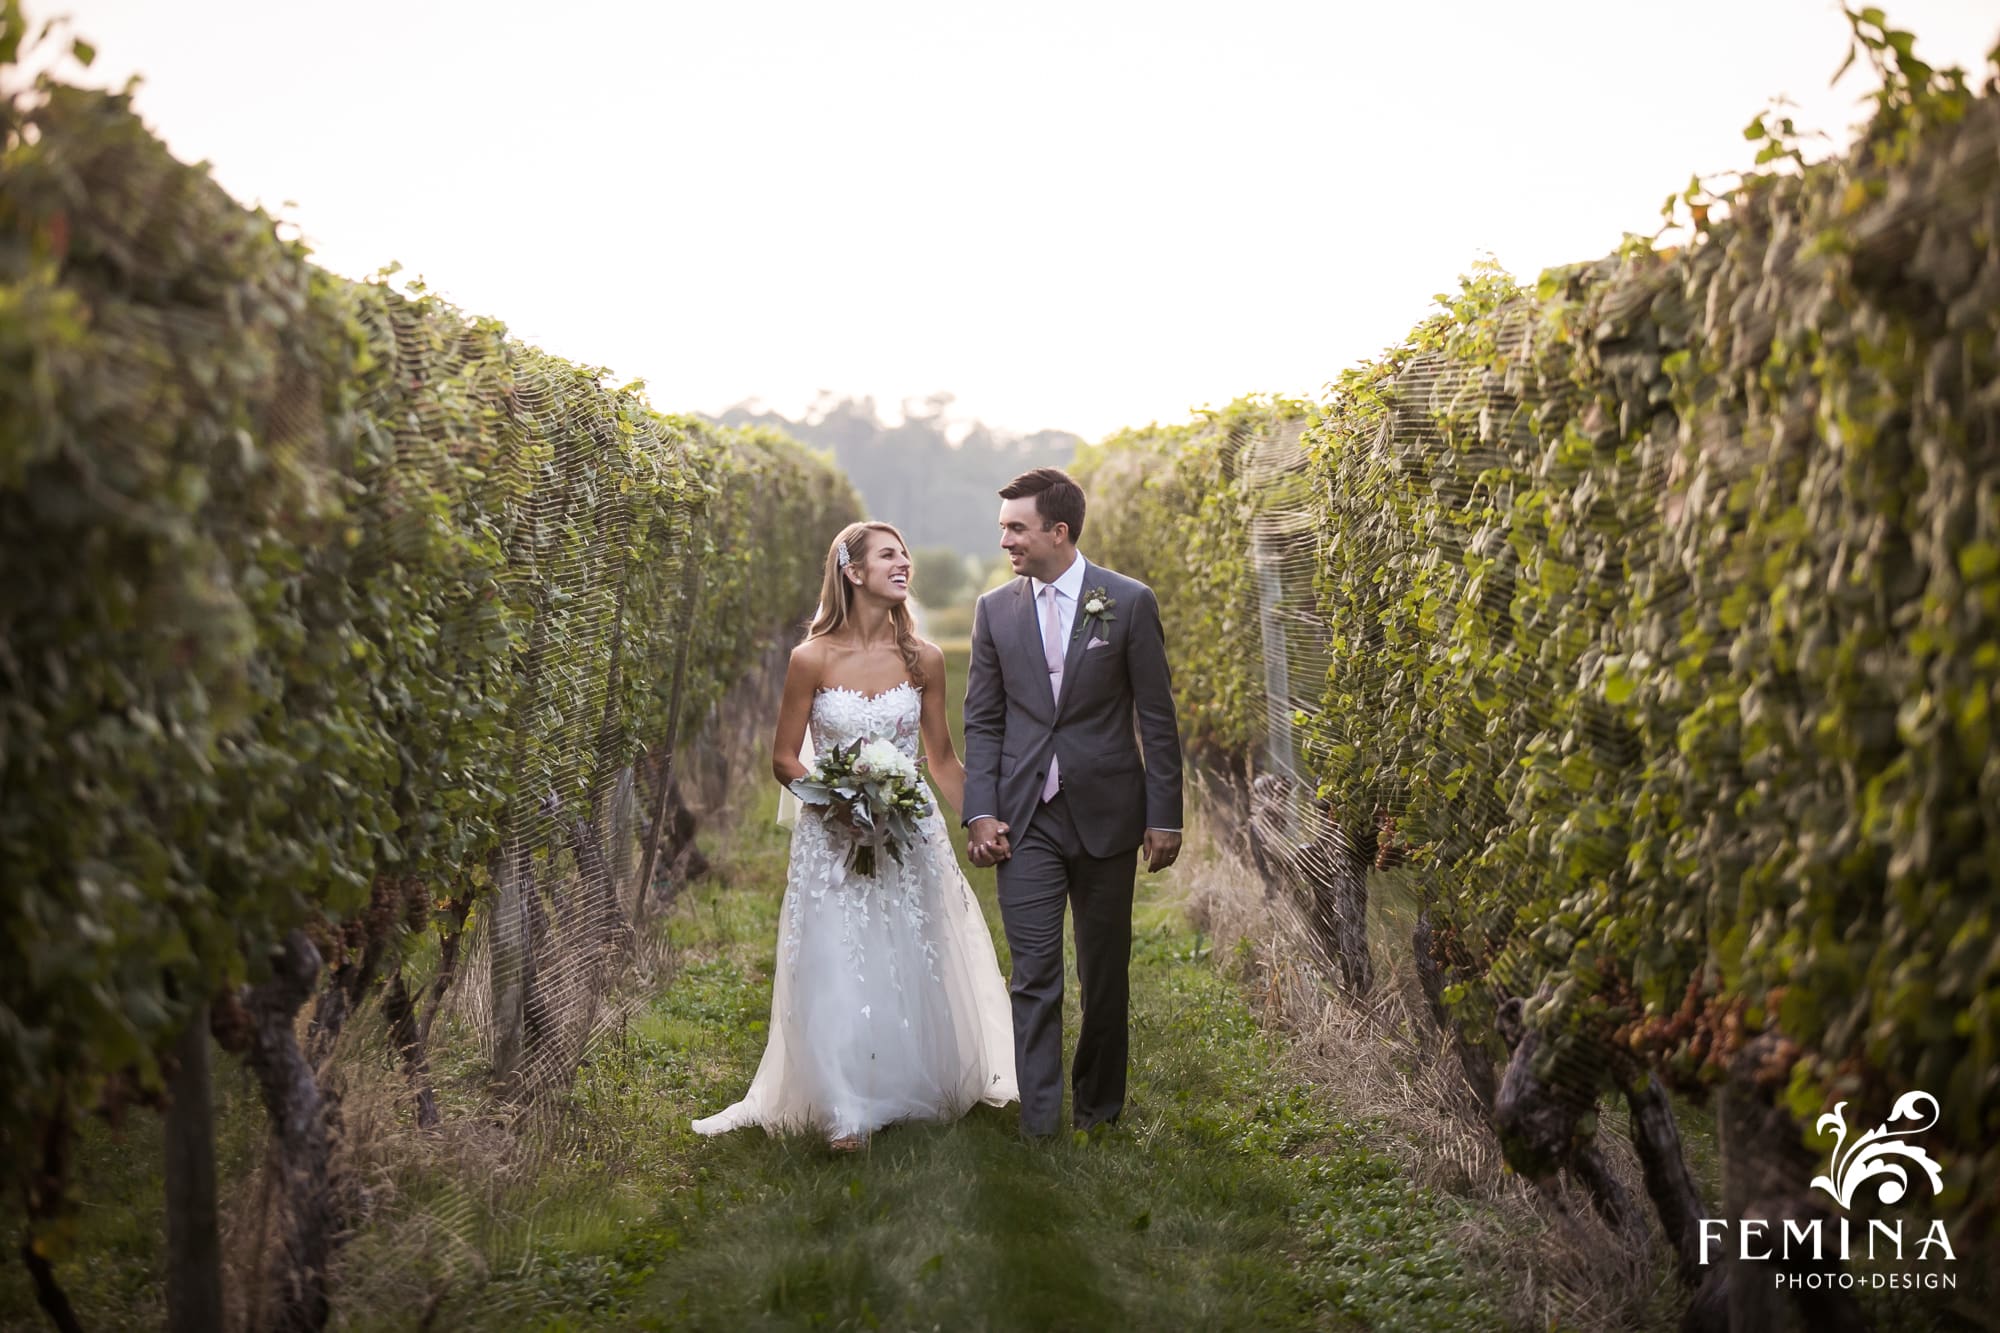 Lindsey and Tommy take a stroll through the vineyards of Bedell Cellars